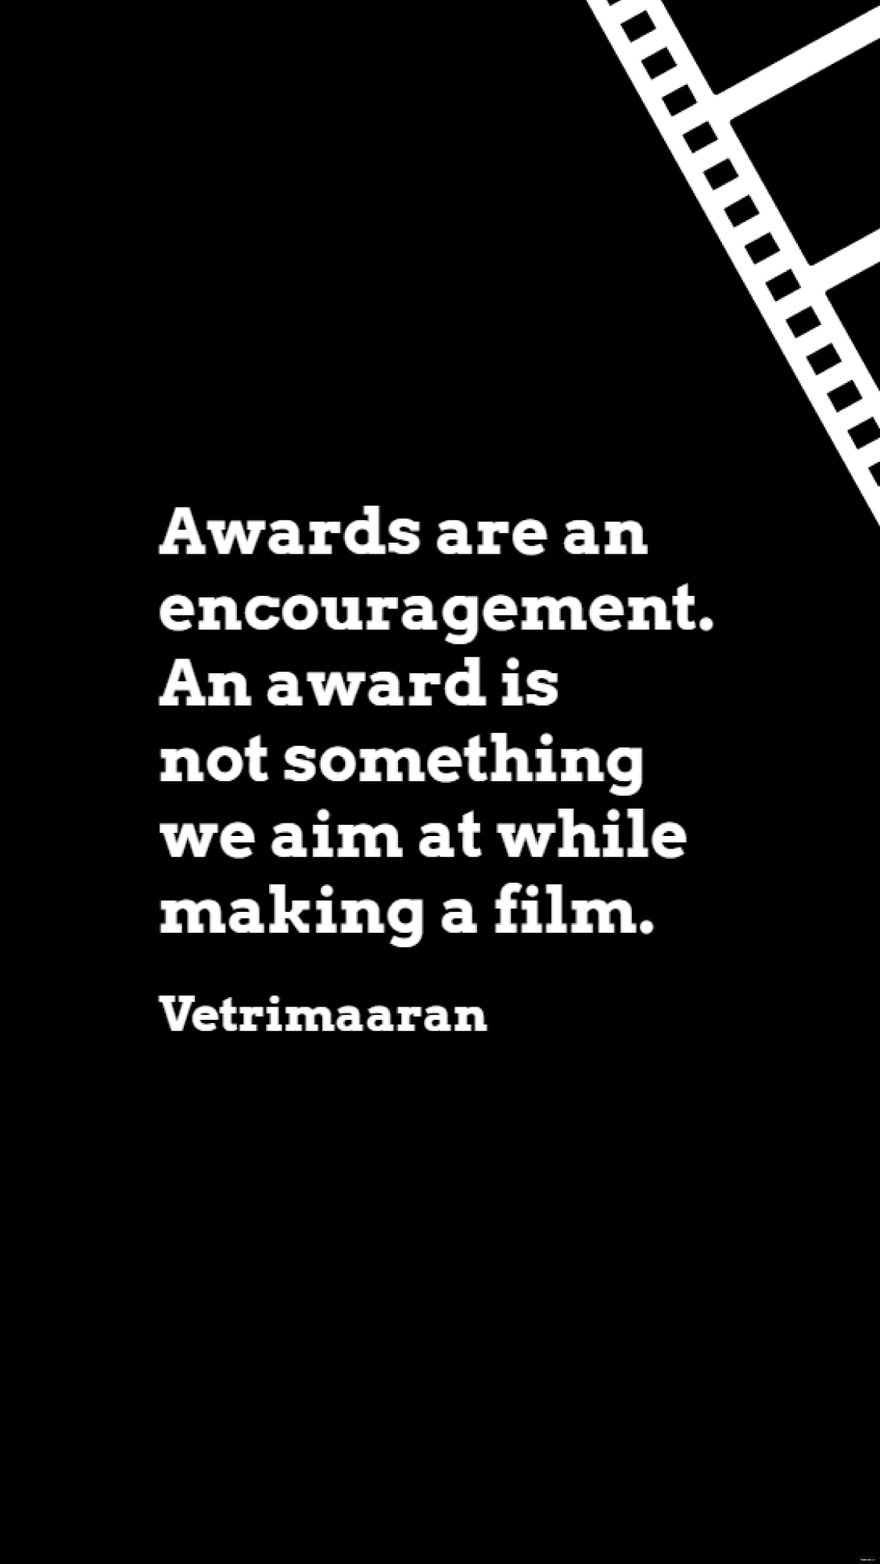 Vetrimaaran - Awards are an encouragement. An award is not something we aim at while making a film. in JPG